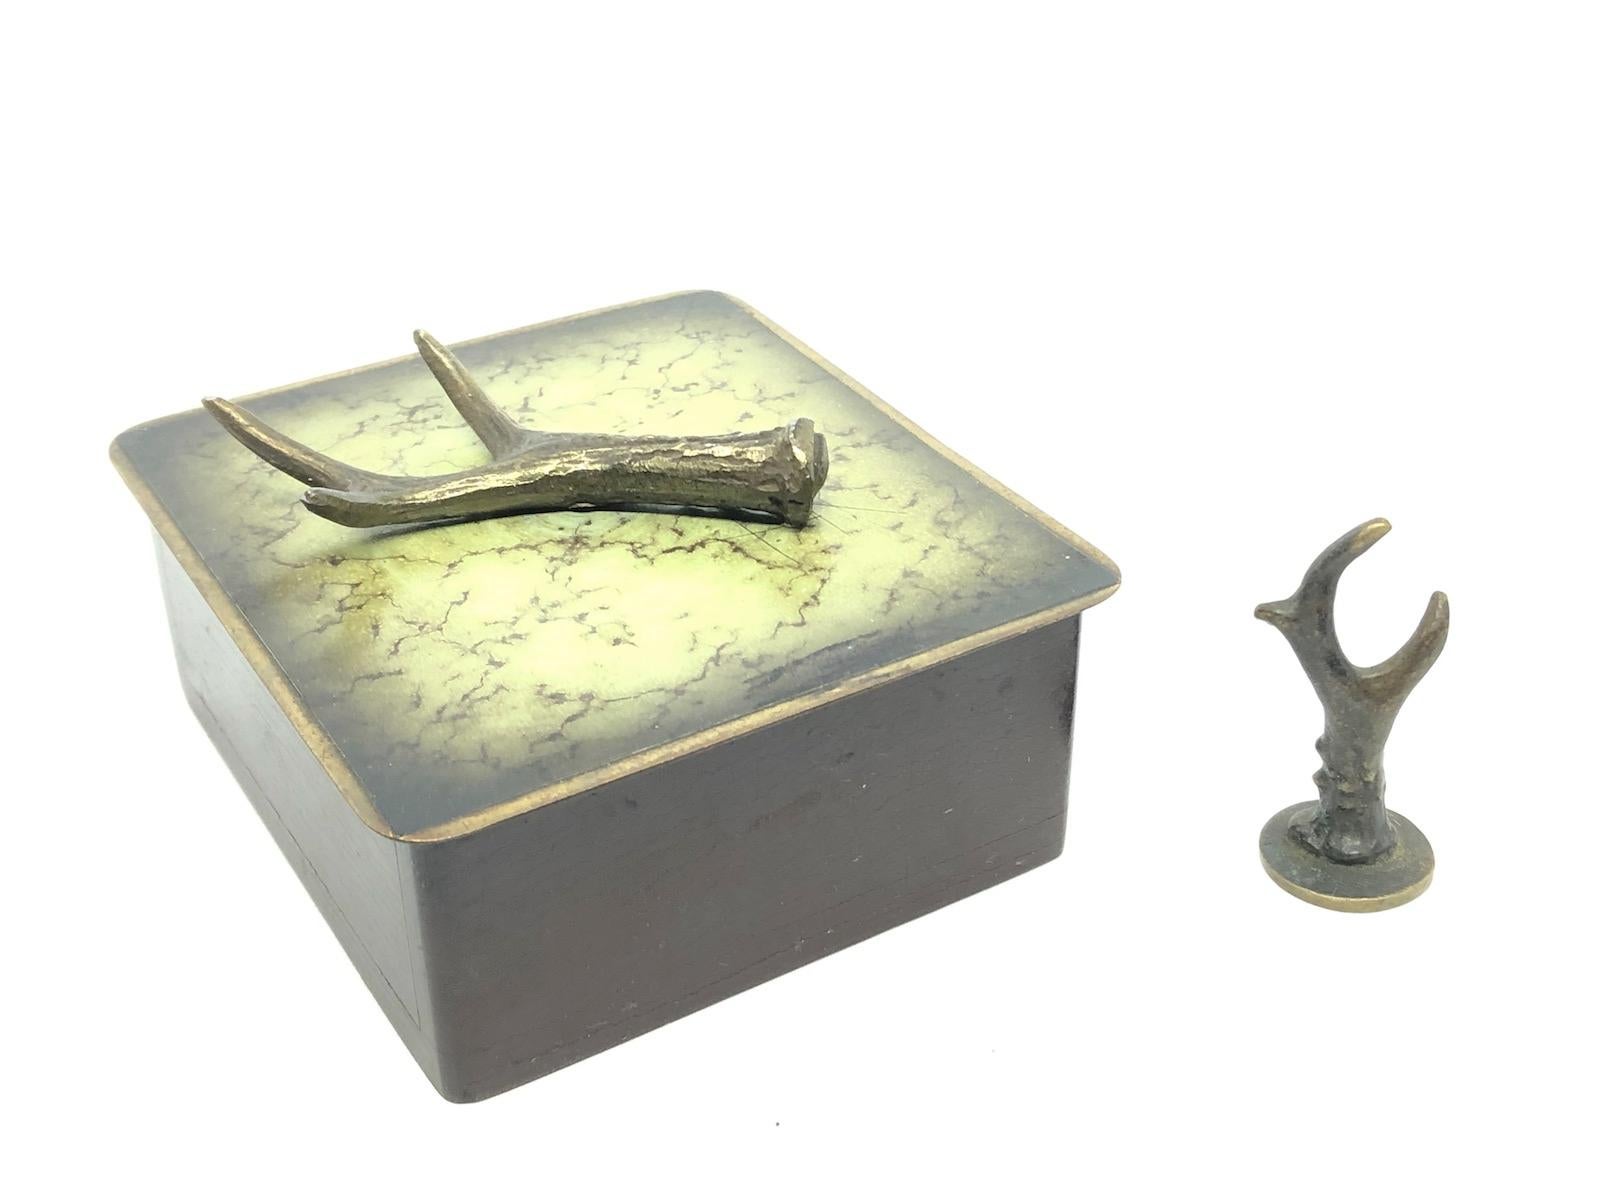 A beautiful wooden cigar or cigarette box with a bronze lid, has a bronze antler on the top as a handle. Also a little figure to use in your ashtray to kill the embers of your cigar or cigarette, it is in the form of a deer antler made also from